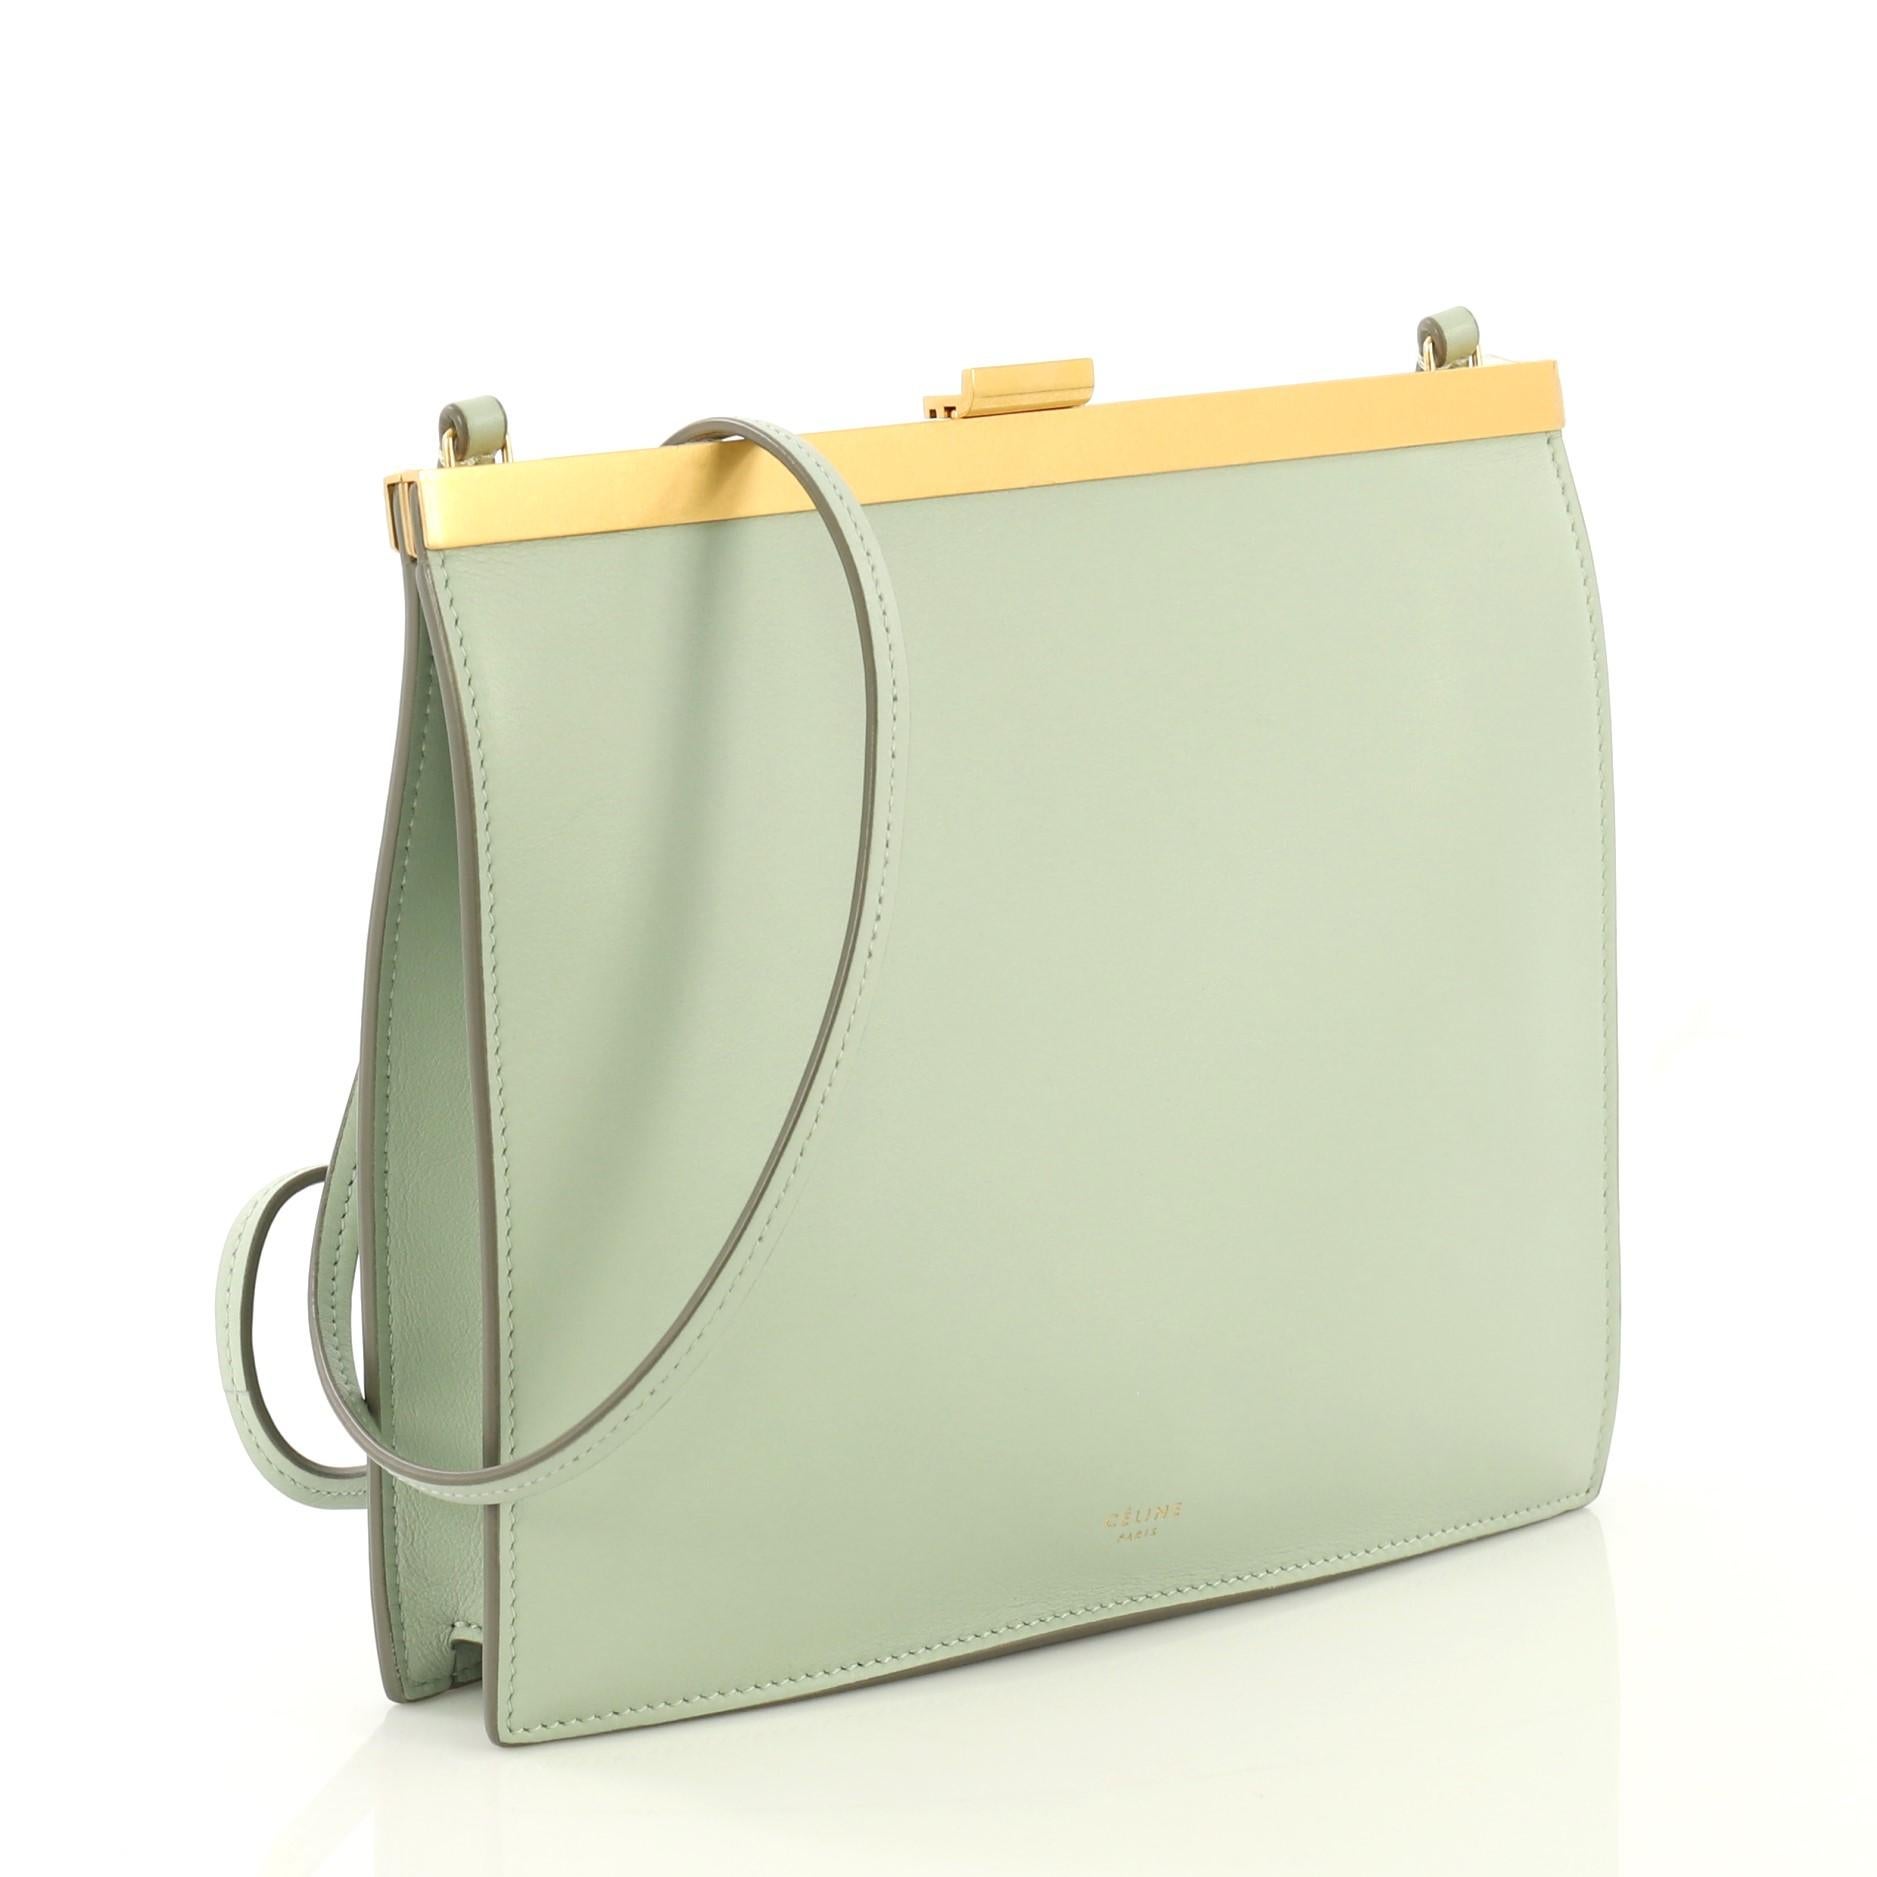 This Celine Clasp Crossbody Bag Leather Mini, crafted in green leather, features a slim leather shoulder strap, stamped Celine logo, framed top, and gold-tone hardware. Its clasp closure opens to a brown leather interior with slip pockets.